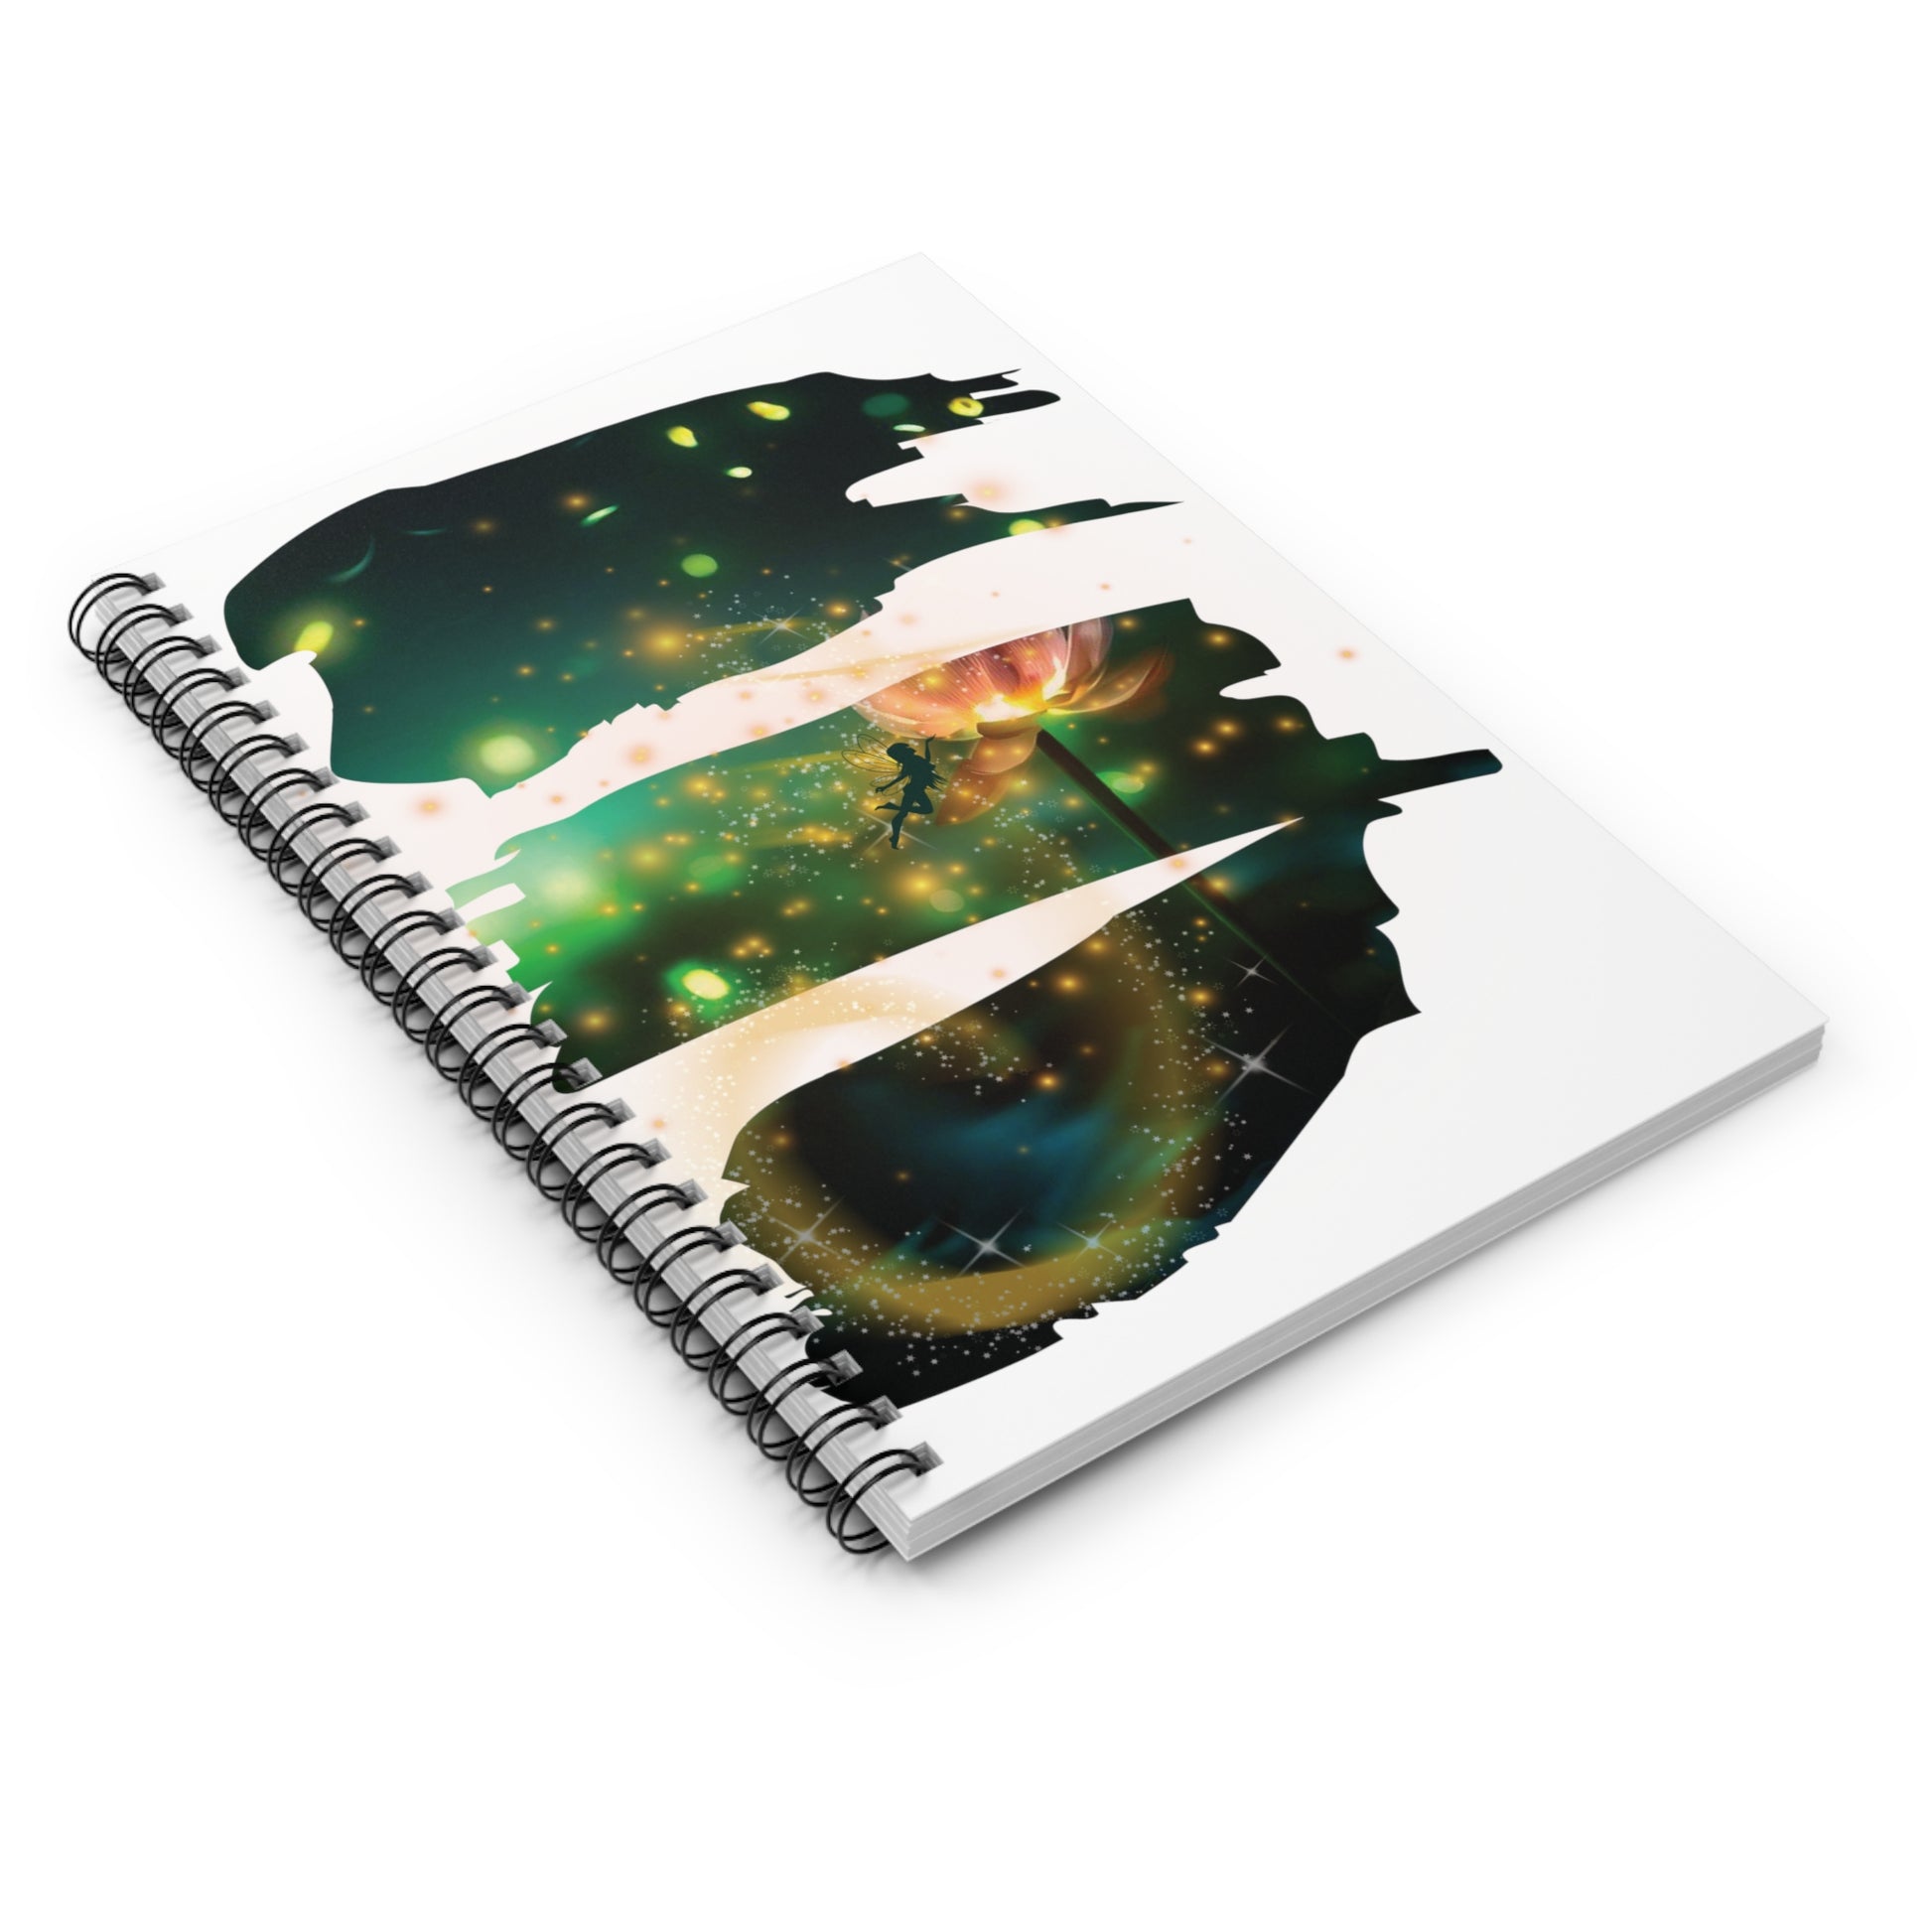 Pixie Dust: Spiral Notebook - Log Books - Journals - Diaries - and More Custom Printed by TheGlassyLass